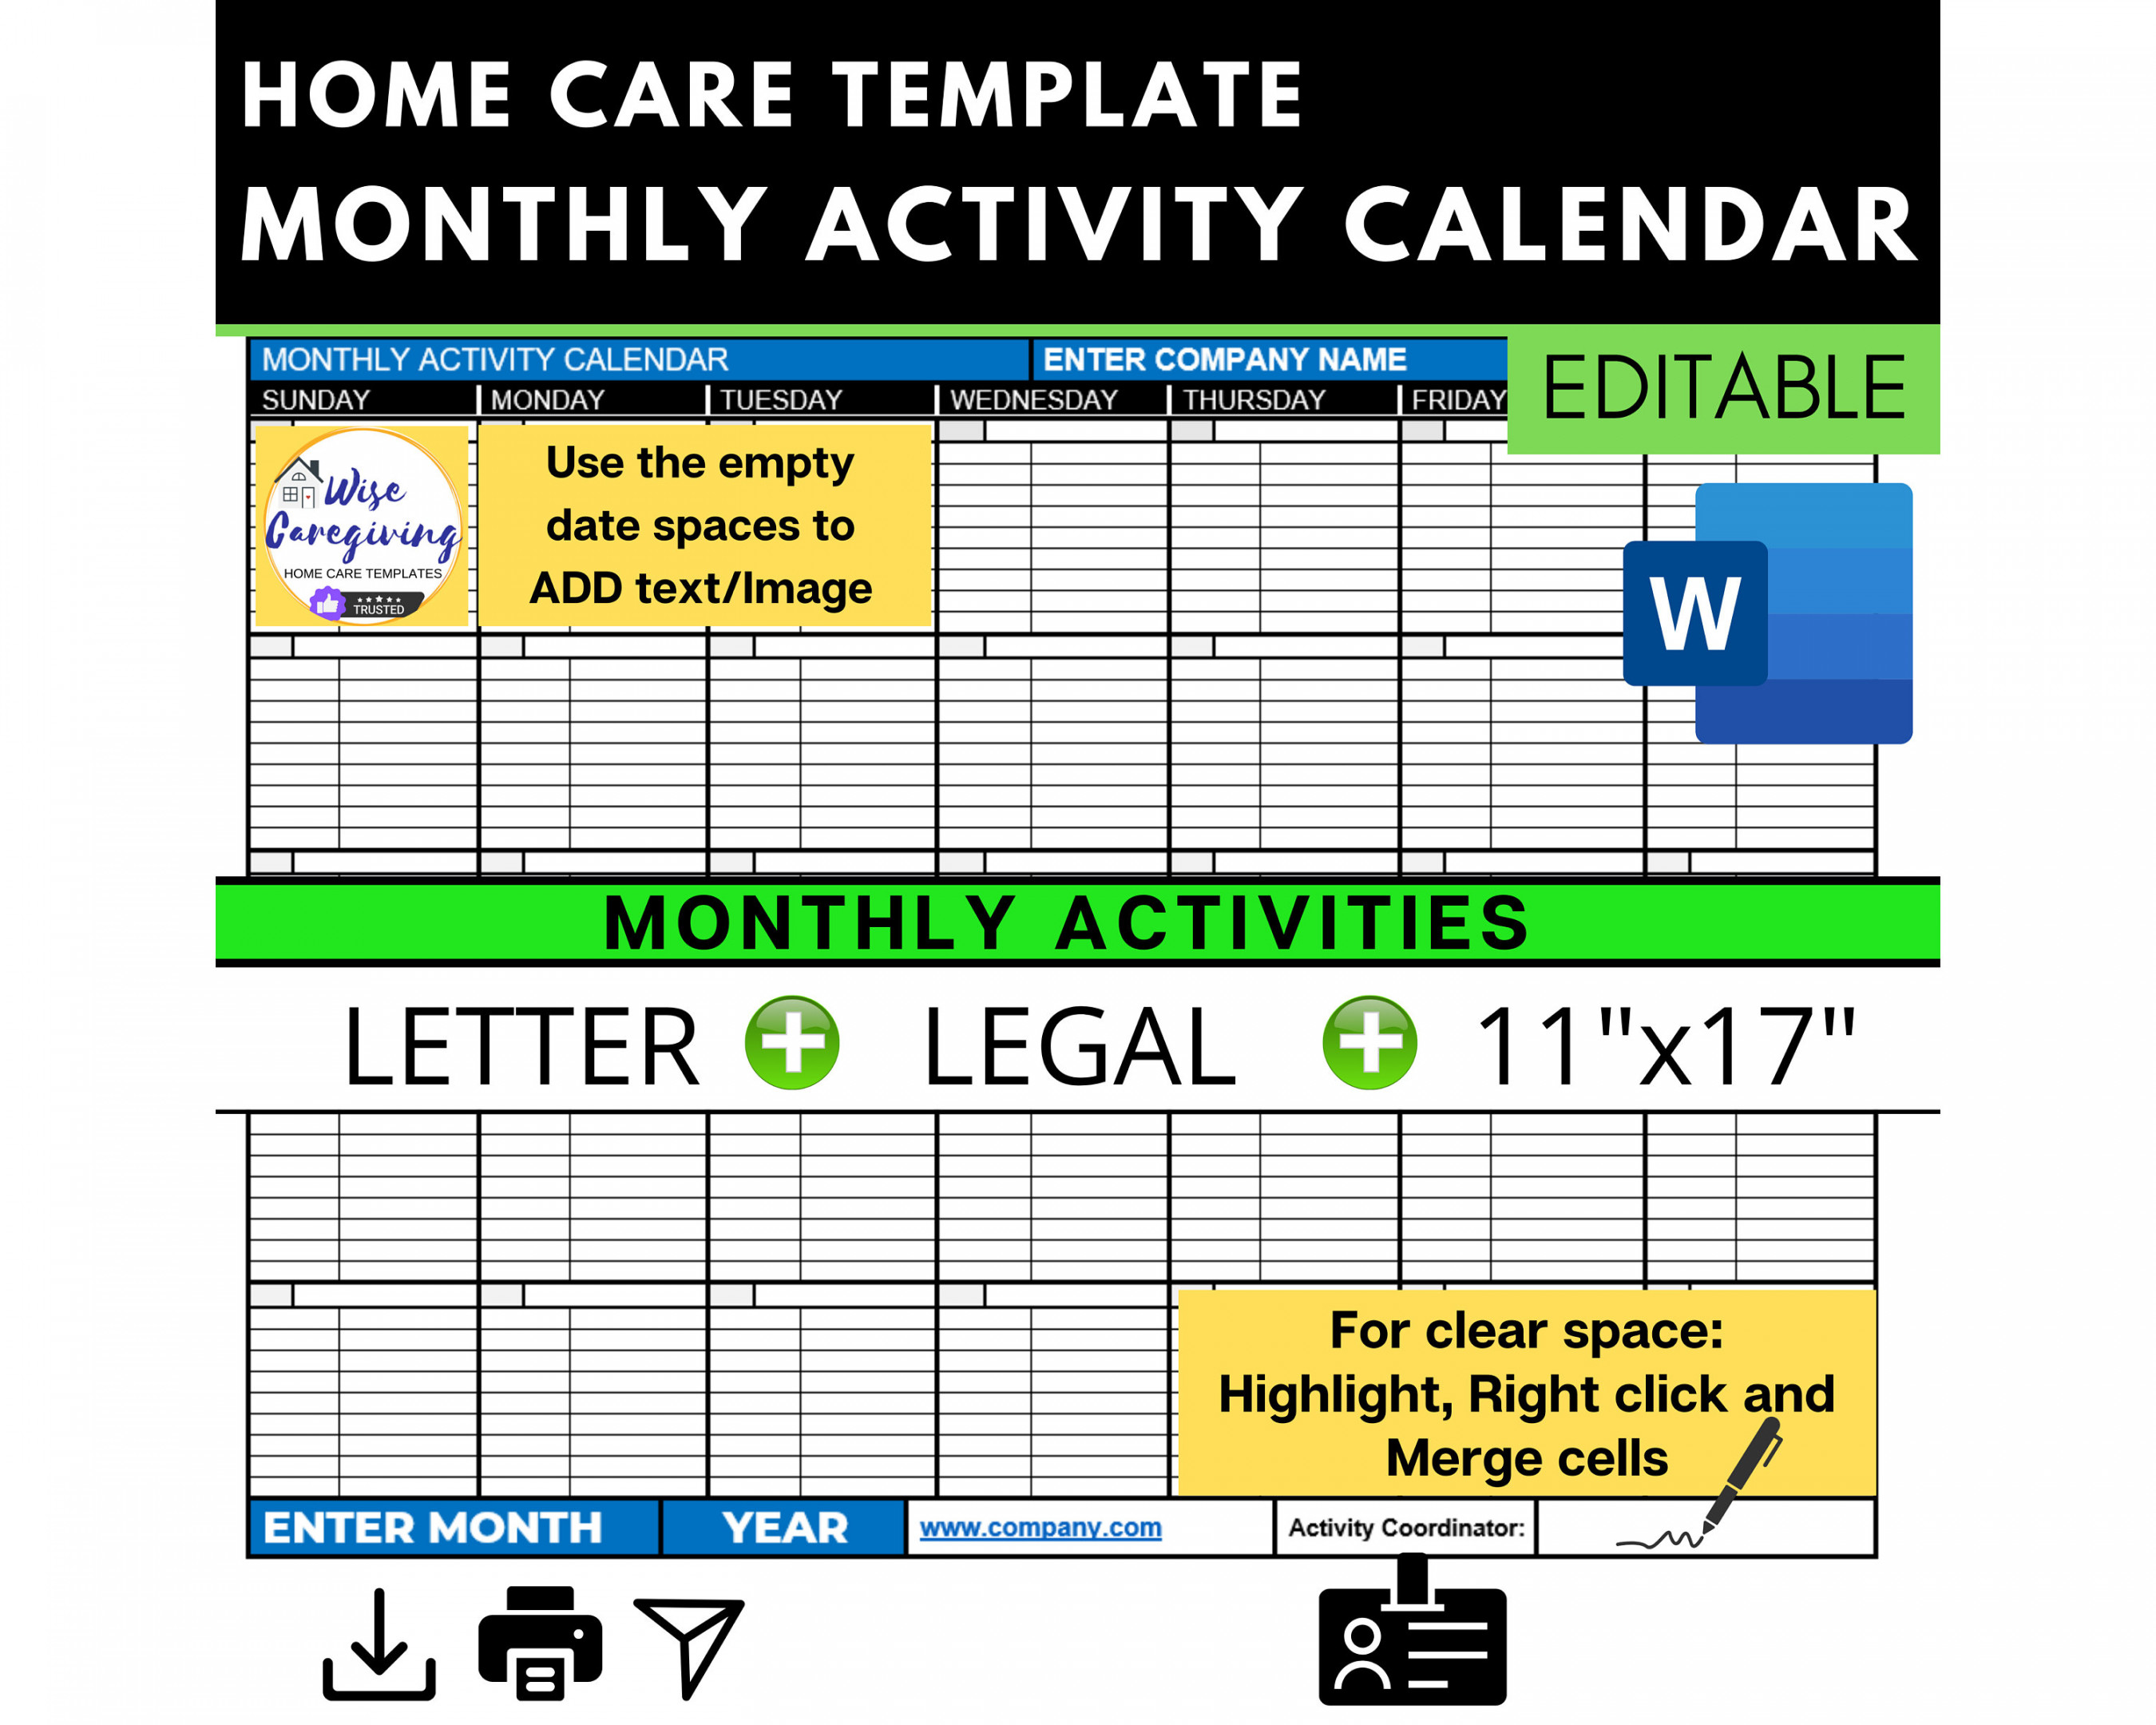 Monthly Activity Calendar Home Care Template (Instant Download) - Etsy